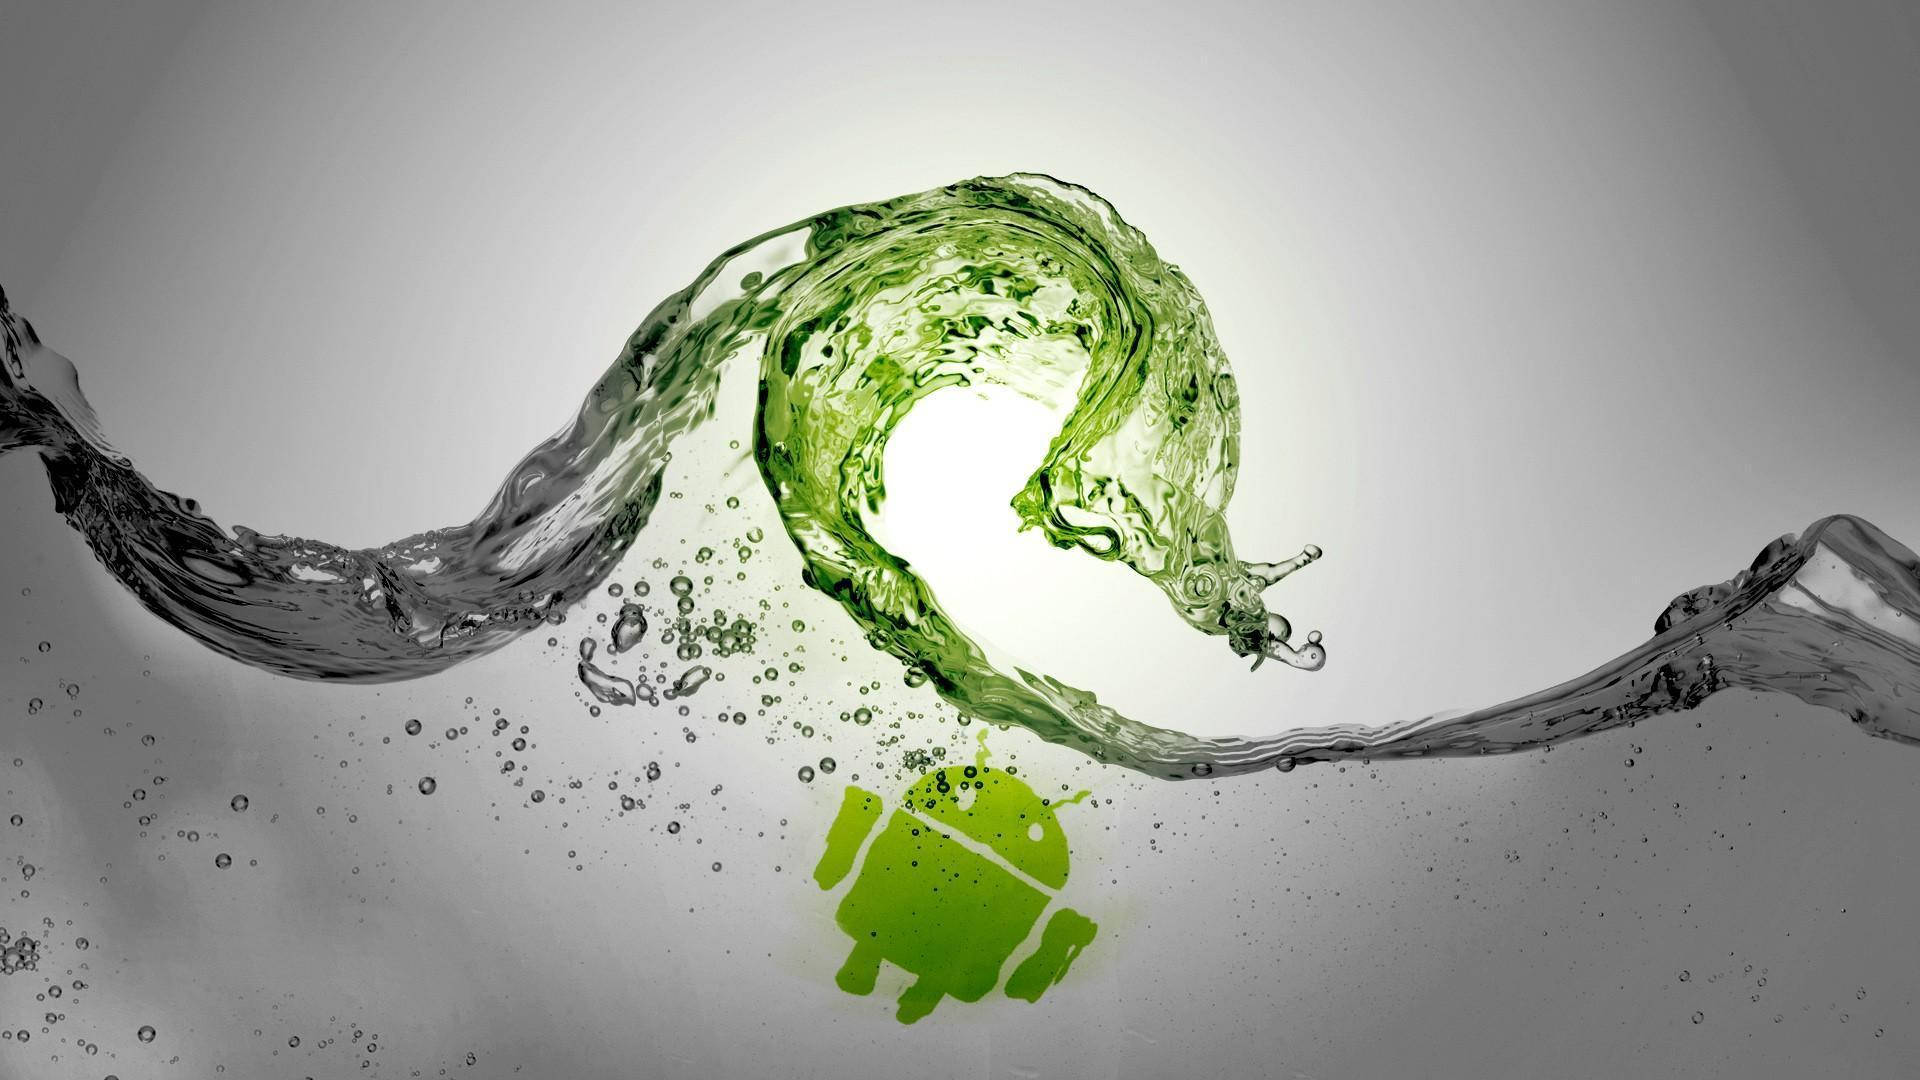 “the Android Robot Rides The Wave Of The Future” Background